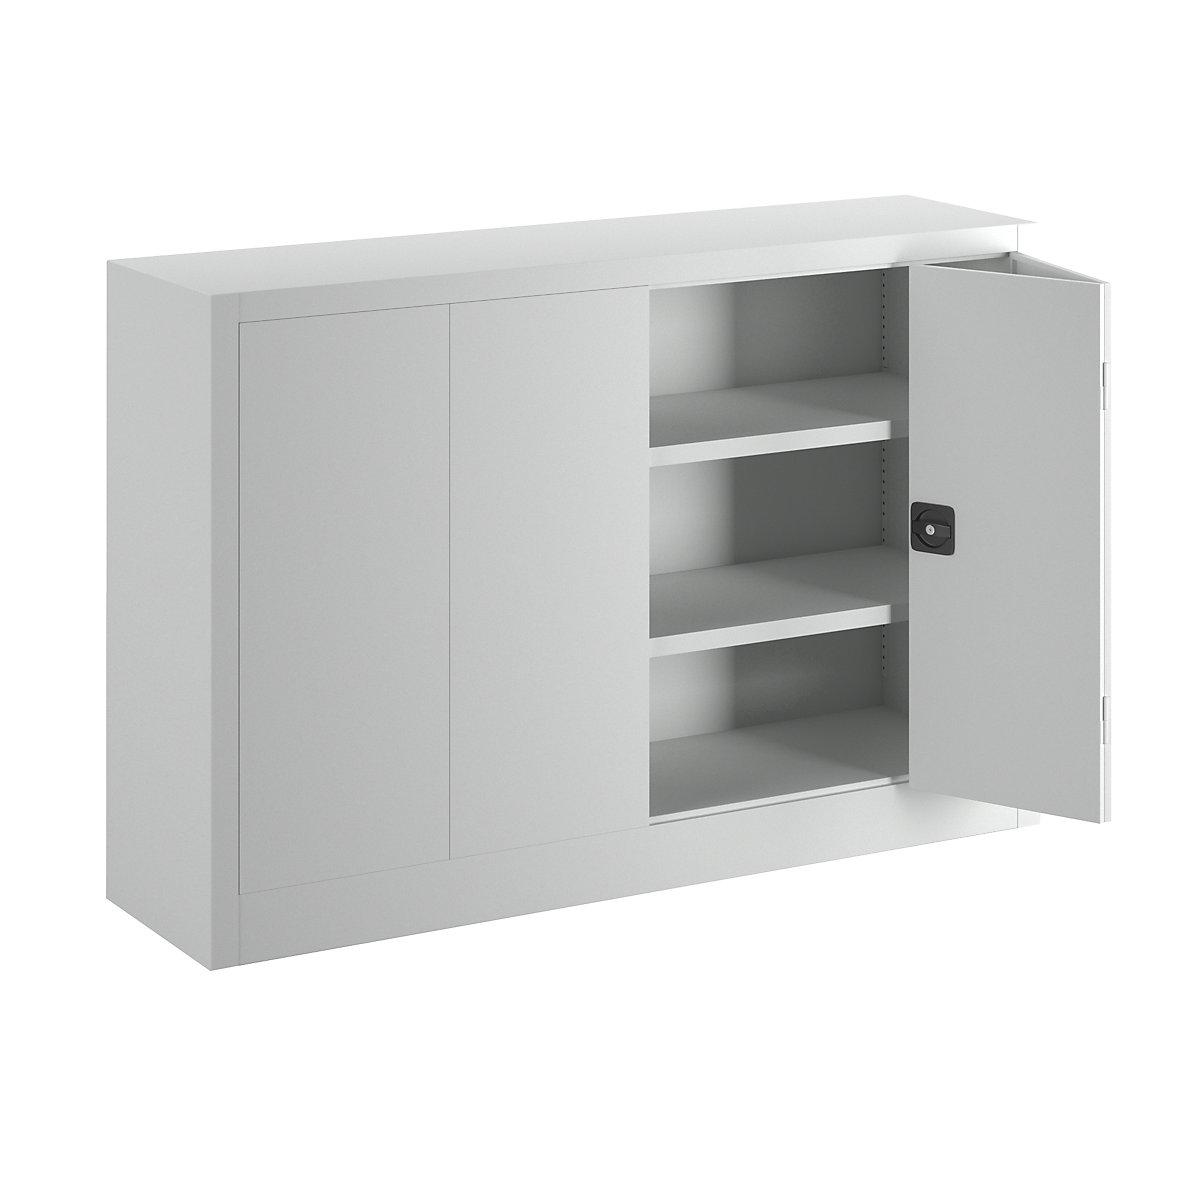 Cupboard with folding doors, height 1000 mm – Pavoy